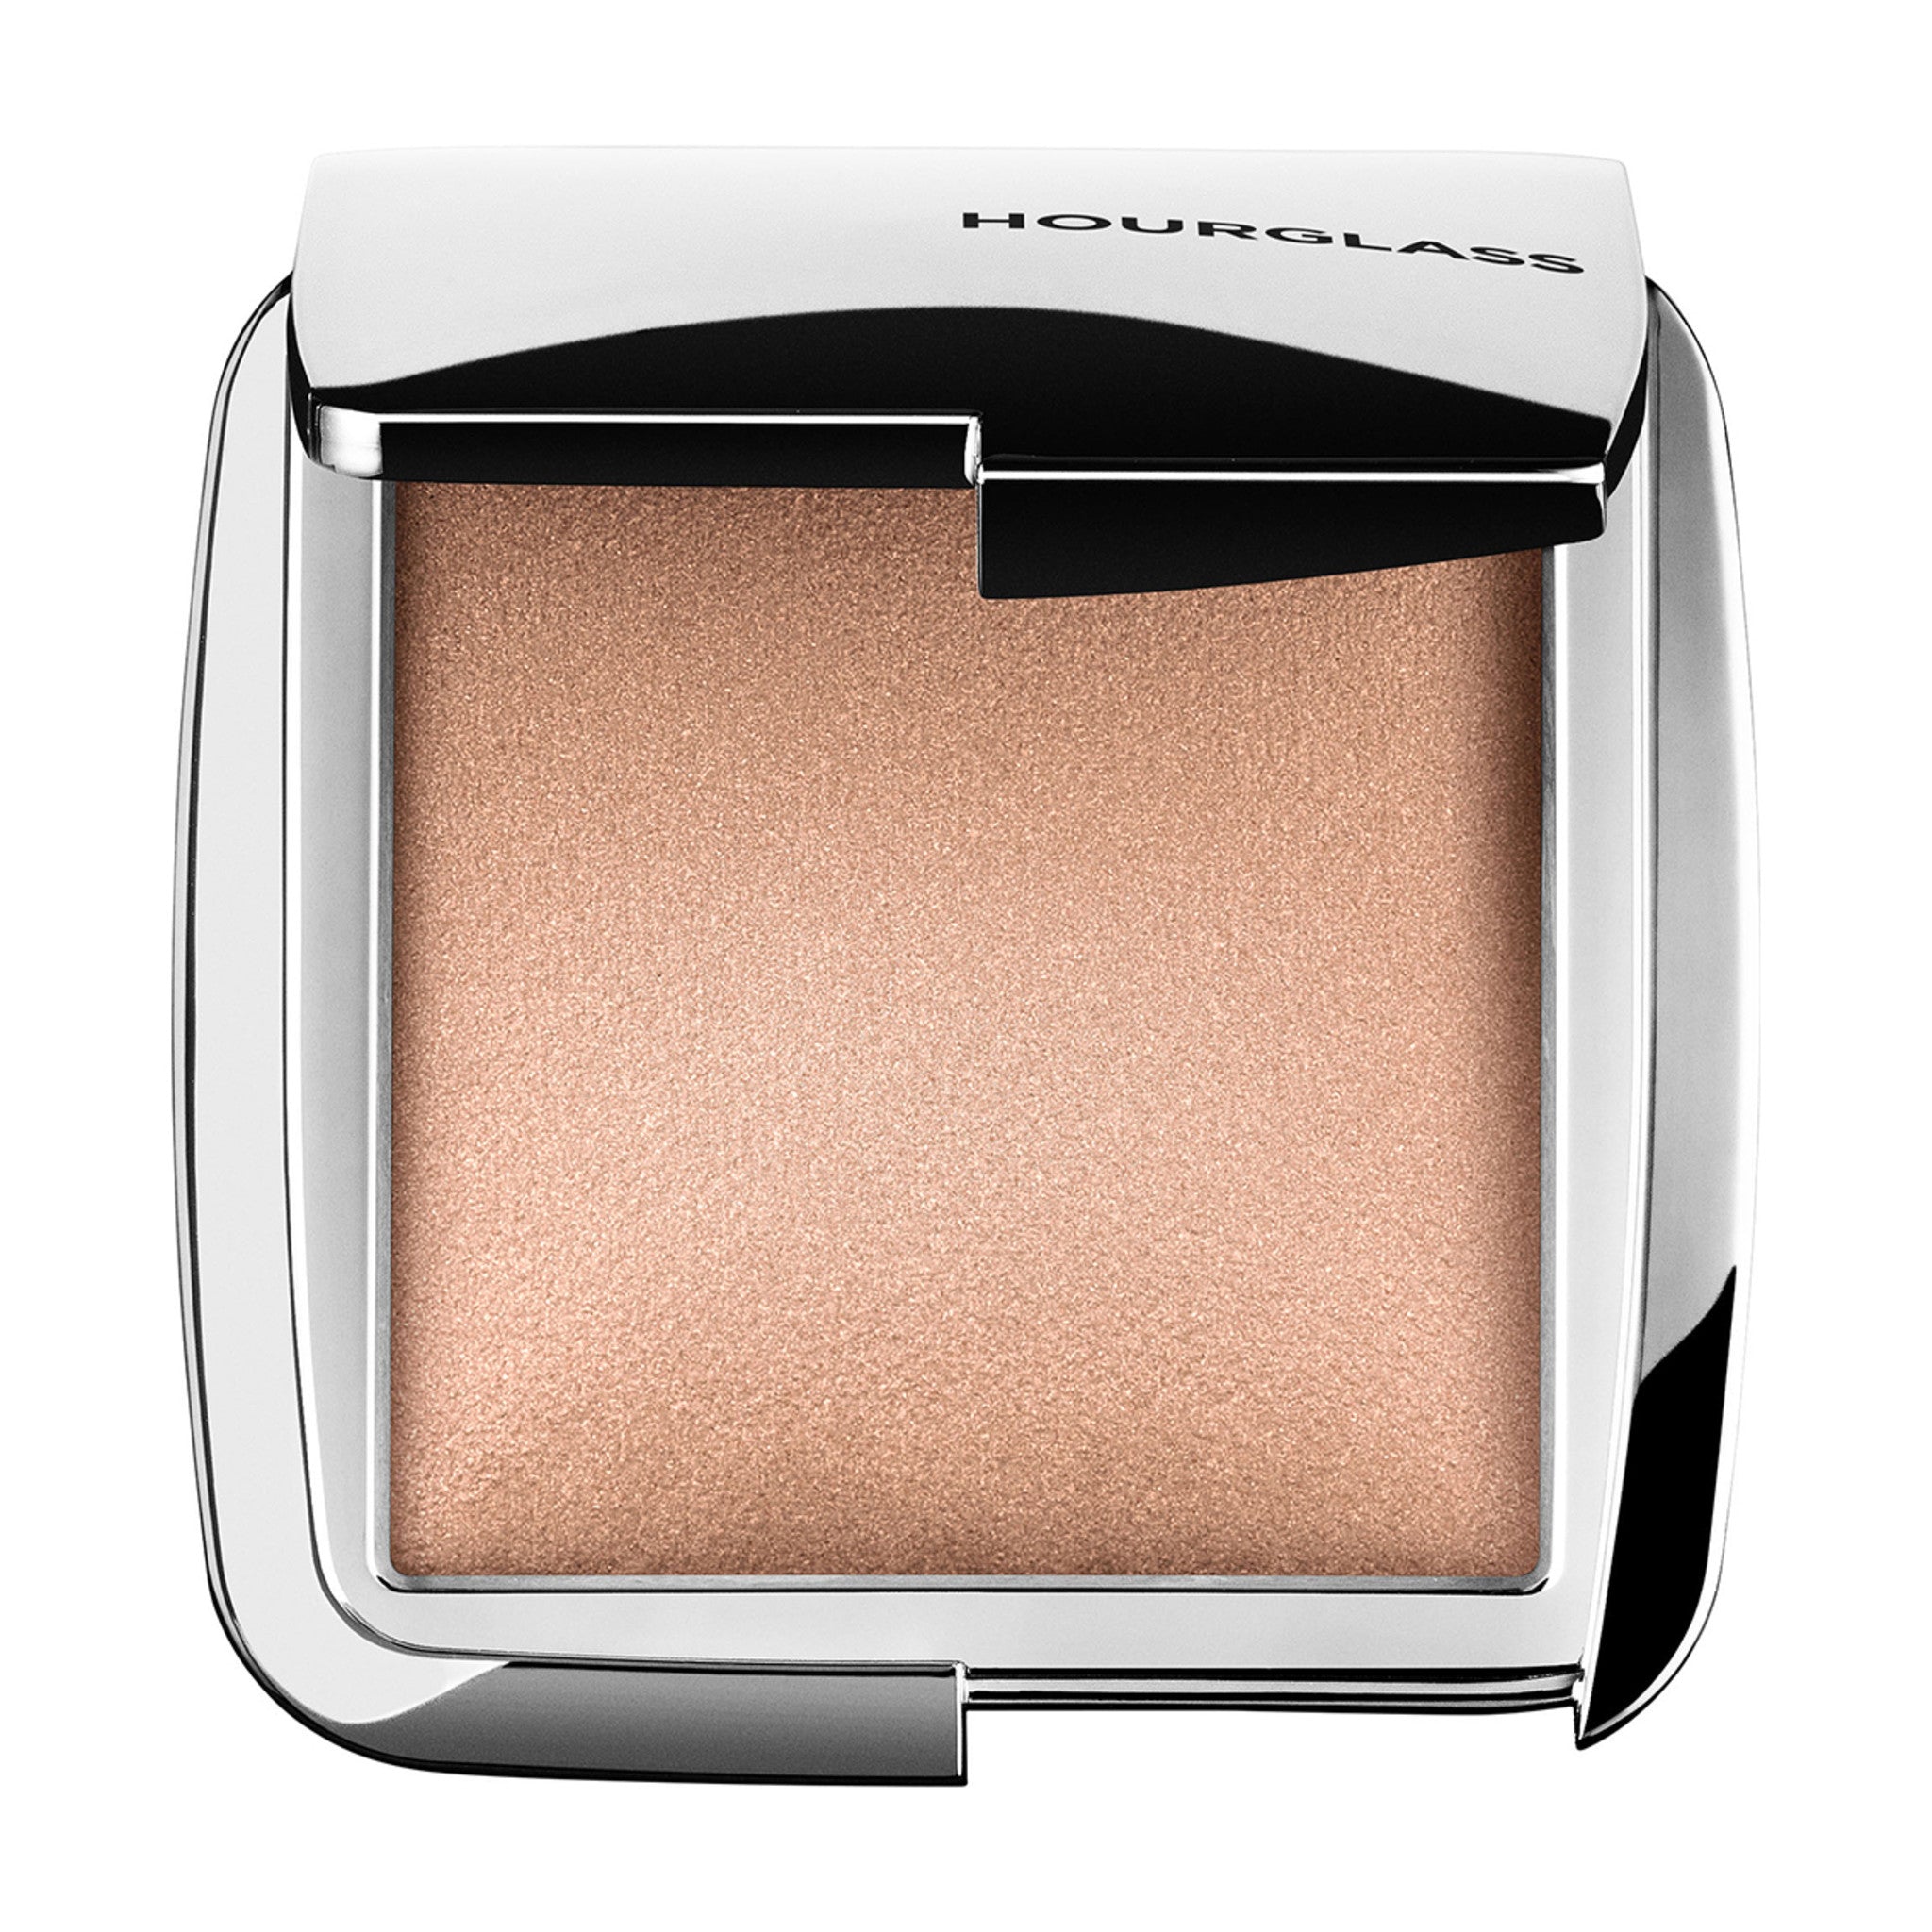 Hourglass Ambient Strobe Lighting Powder Color/Shade variant: Euphoric main image. This product is in the color nude